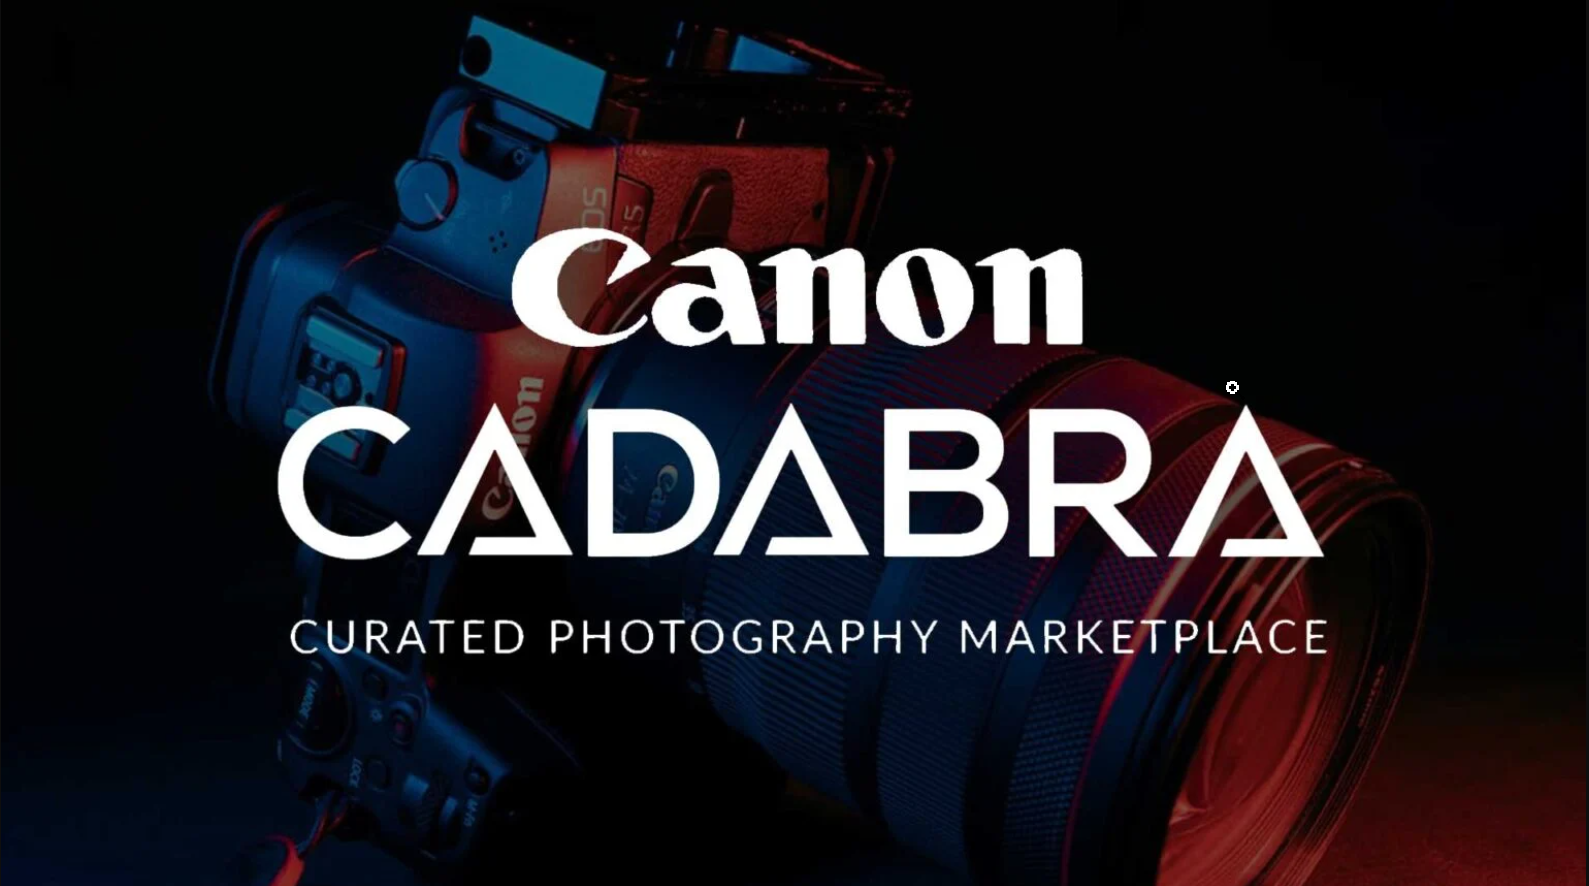 Revolutionizing the Photography Industry: Canon Introduces Cadabra, an Ethereum NFT Marketplace for Photographers